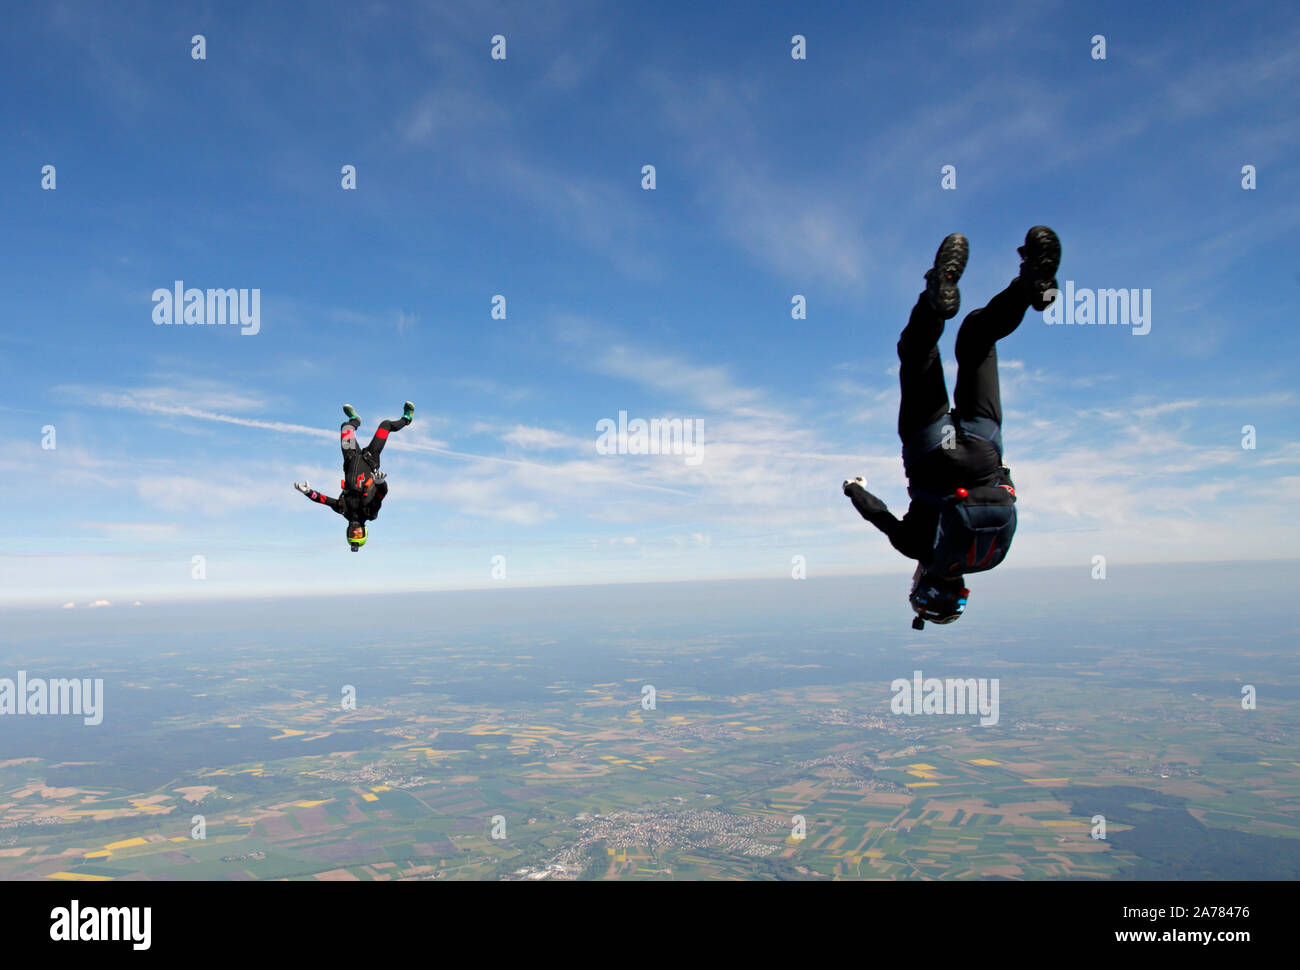 This skydiver head down team is training together the inface tracking around each other. It is fun for both divers and soon they will hold grips. Stock Photo